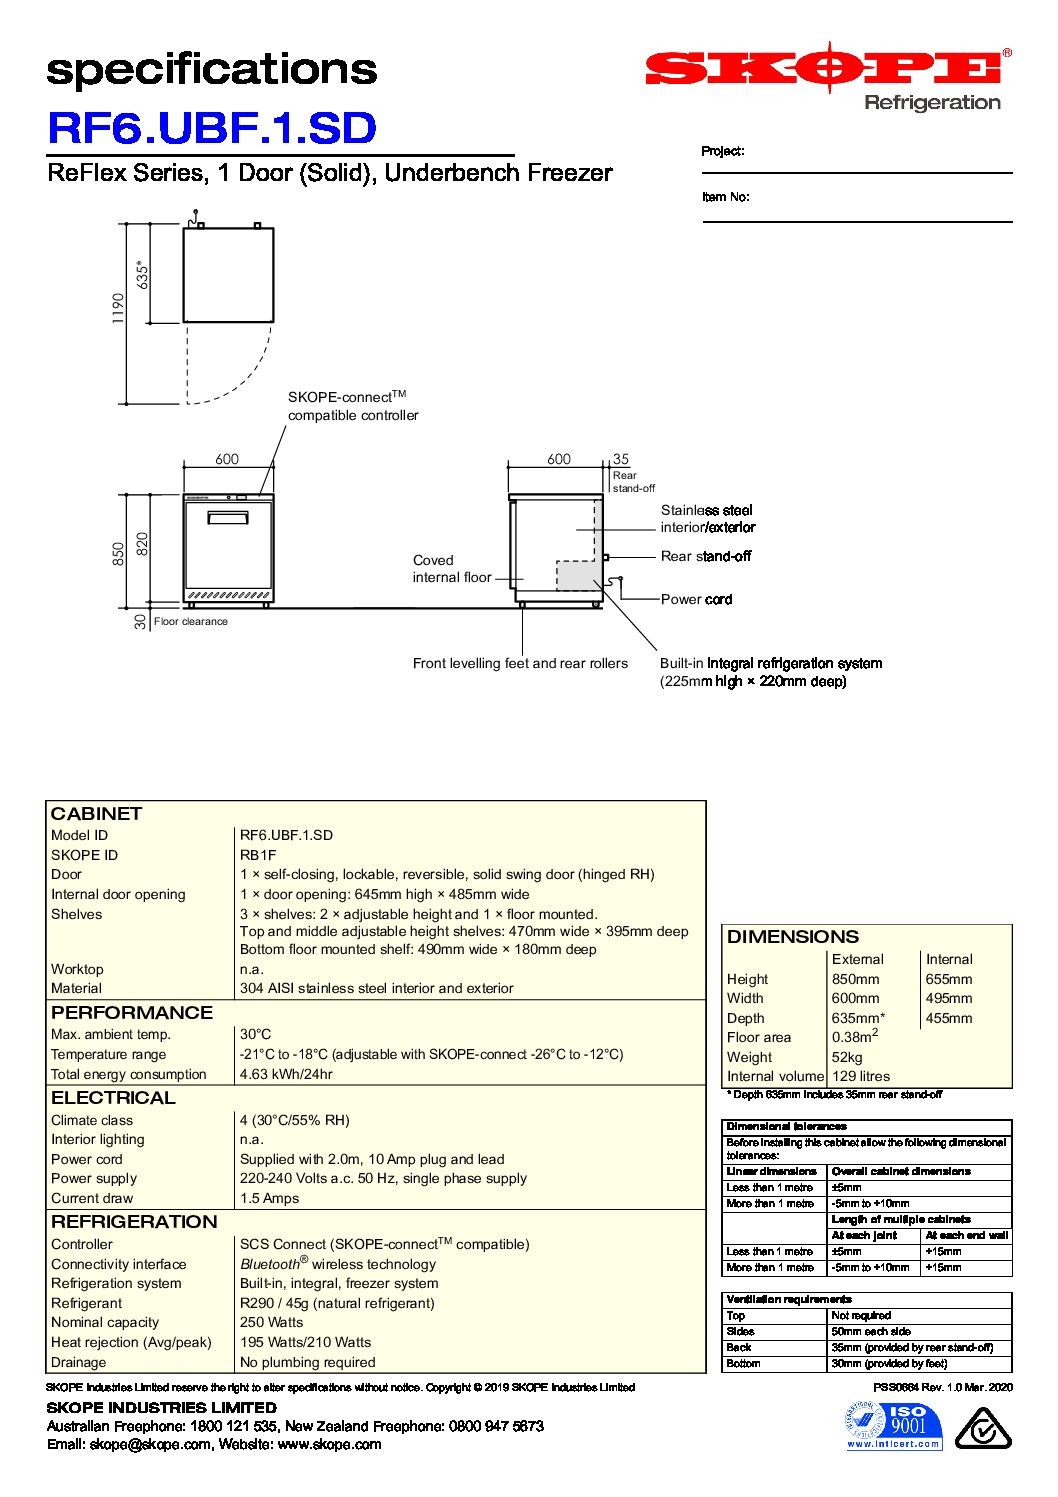 cover page of the ReFlex 1 Solid Door Underbench Freezer specification sheet pdf